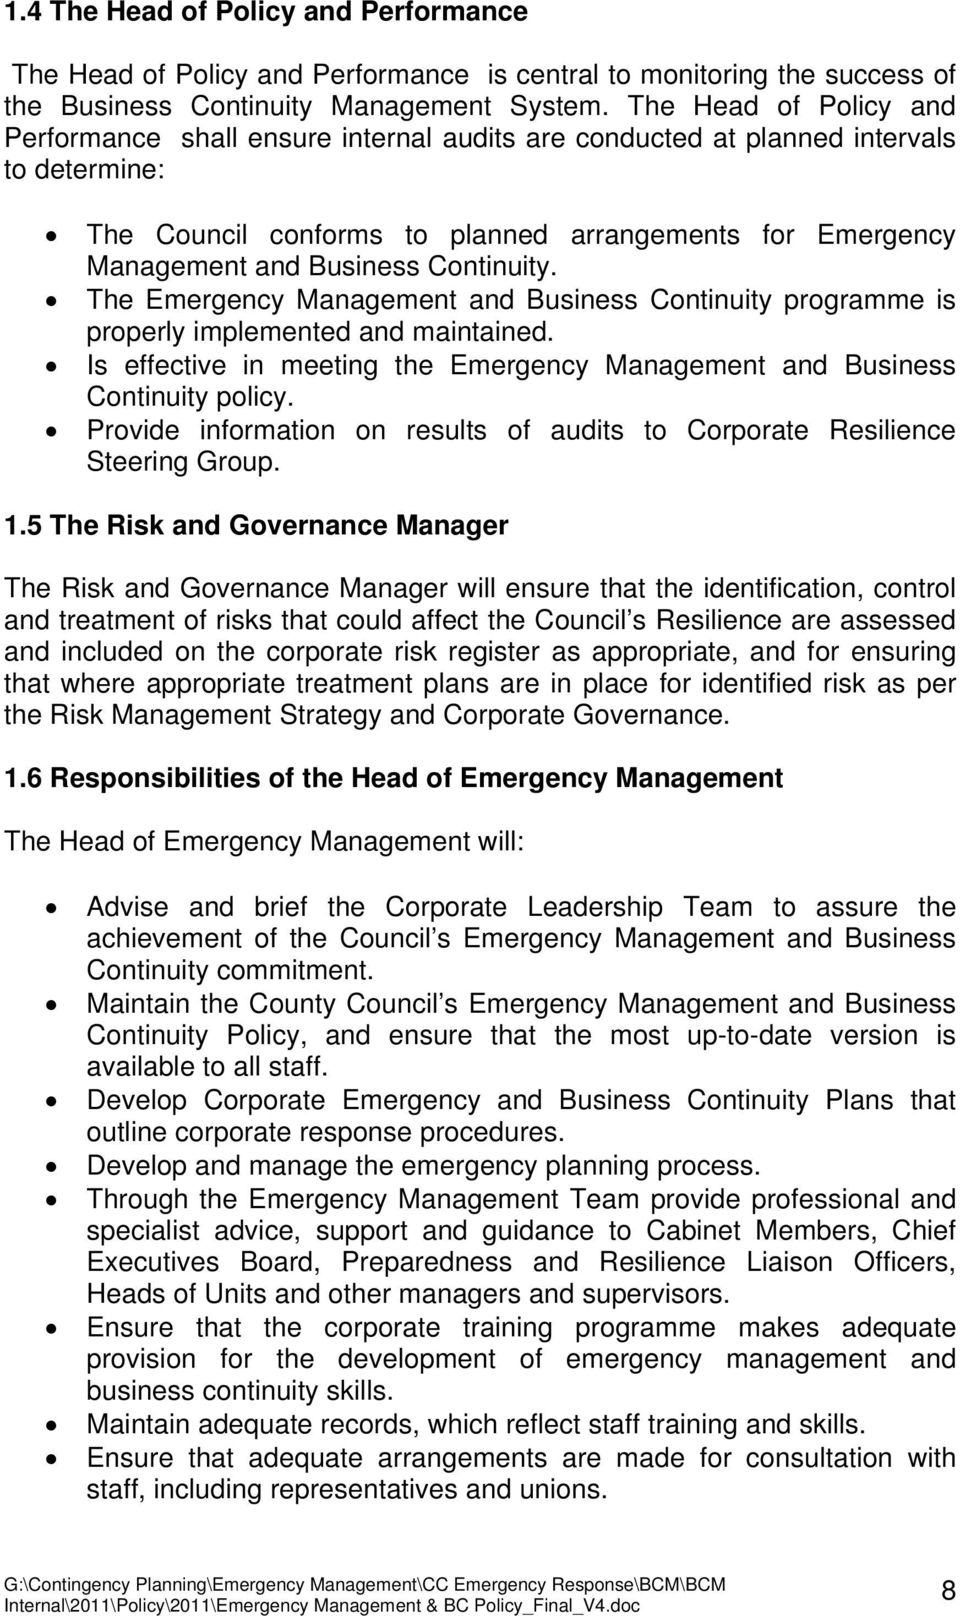 Continuity. The Emergency Management and Business Continuity programme is properly implemented and maintained. Is effective in meeting the Emergency Management and Business Continuity policy.